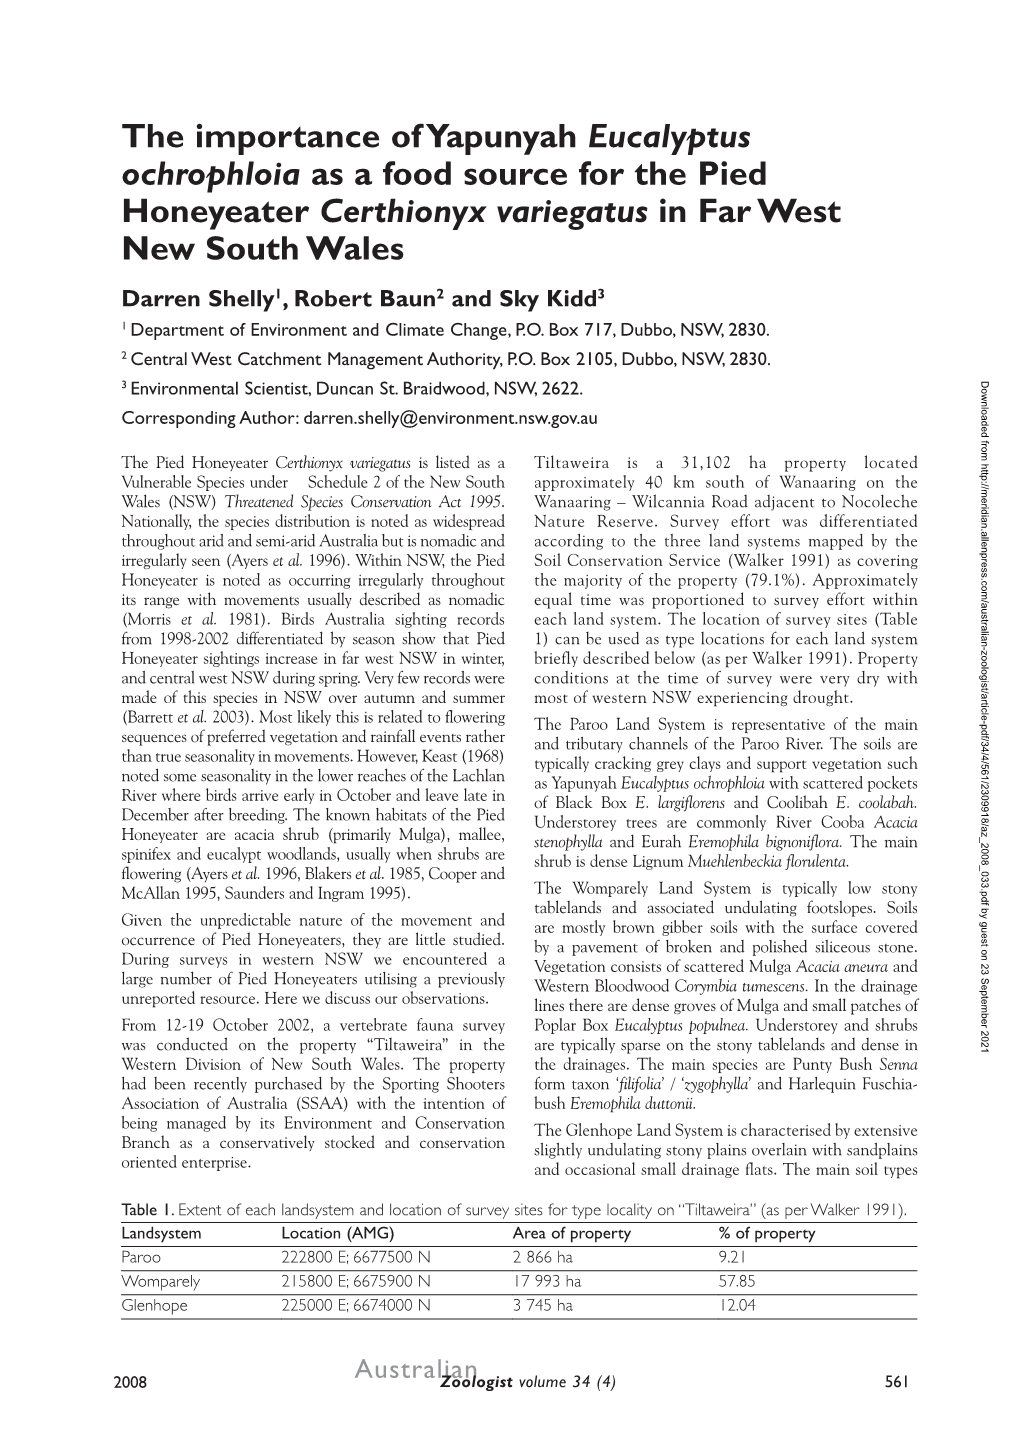 The Importance of Yapunyah Eucalyptus Ochrophloia As a Food Source for the Pied Honeyeater Certhionyx Variegatus in Far West